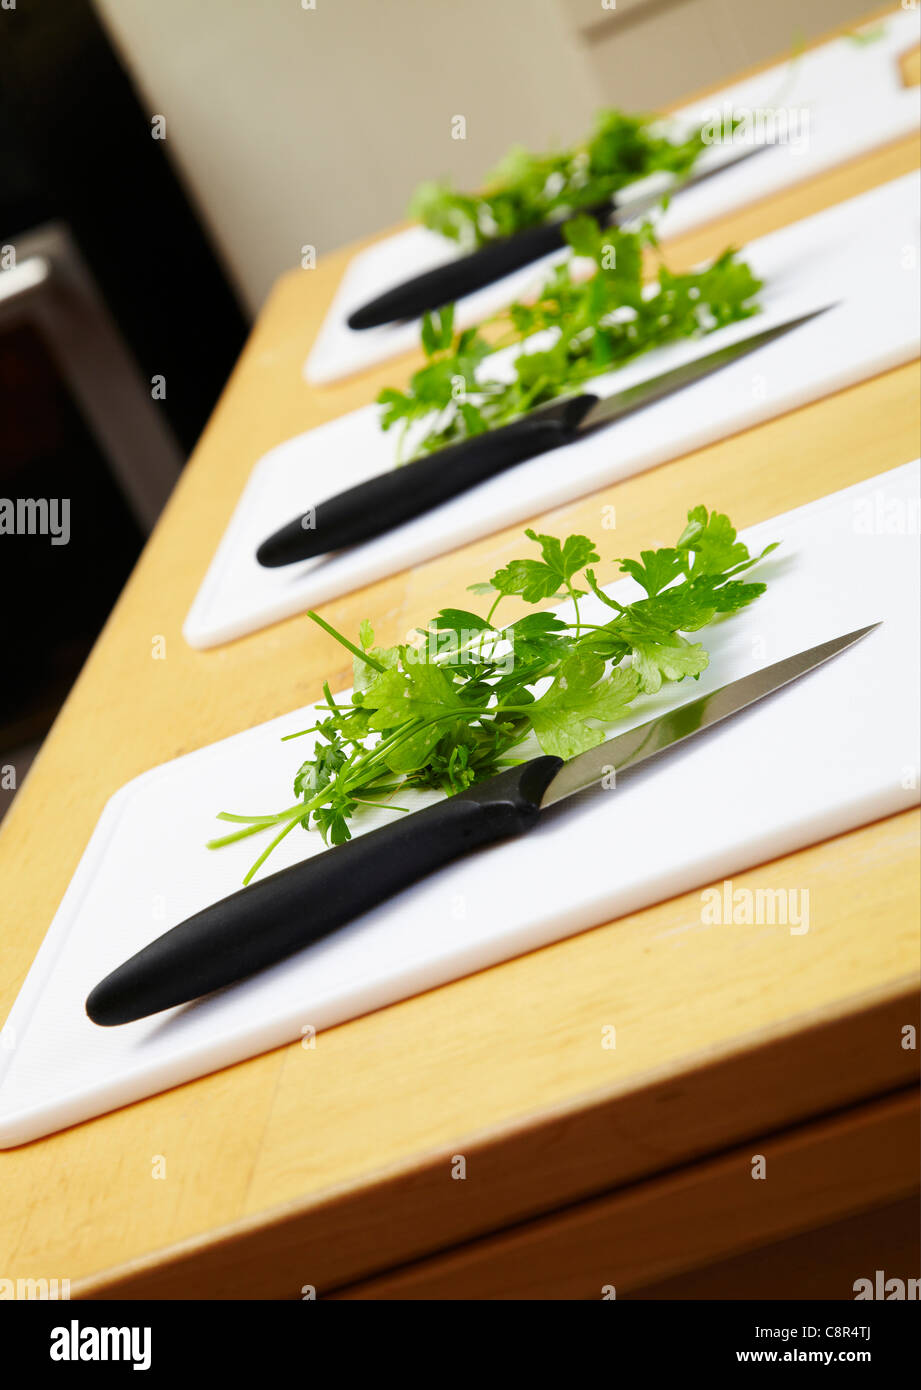 Green herbs on chopping board with kitchen knife. Ready for chopping in cookery class. Stock Photo